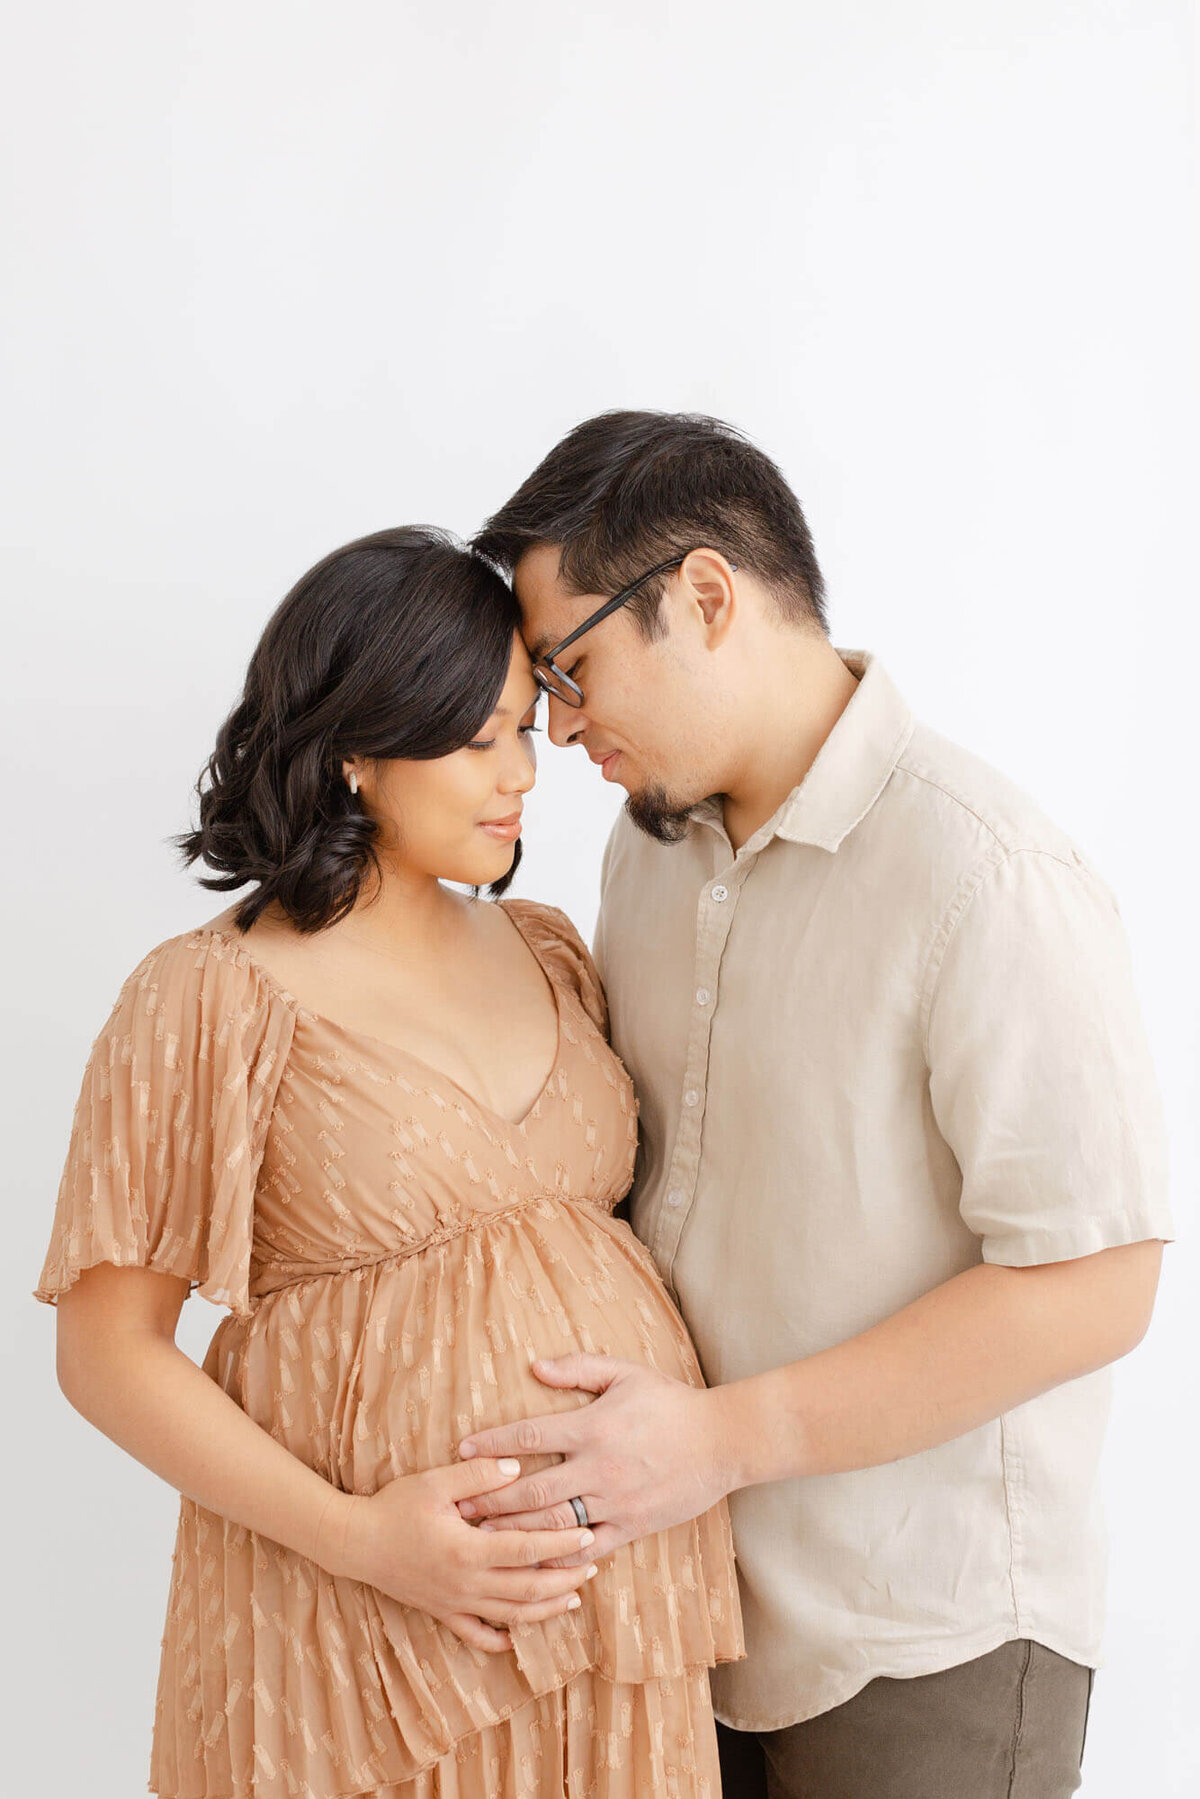 Woman in a light brown dress holding her baby bump standing next to her husband. Their foreheads are touching and they are holding her belly together.